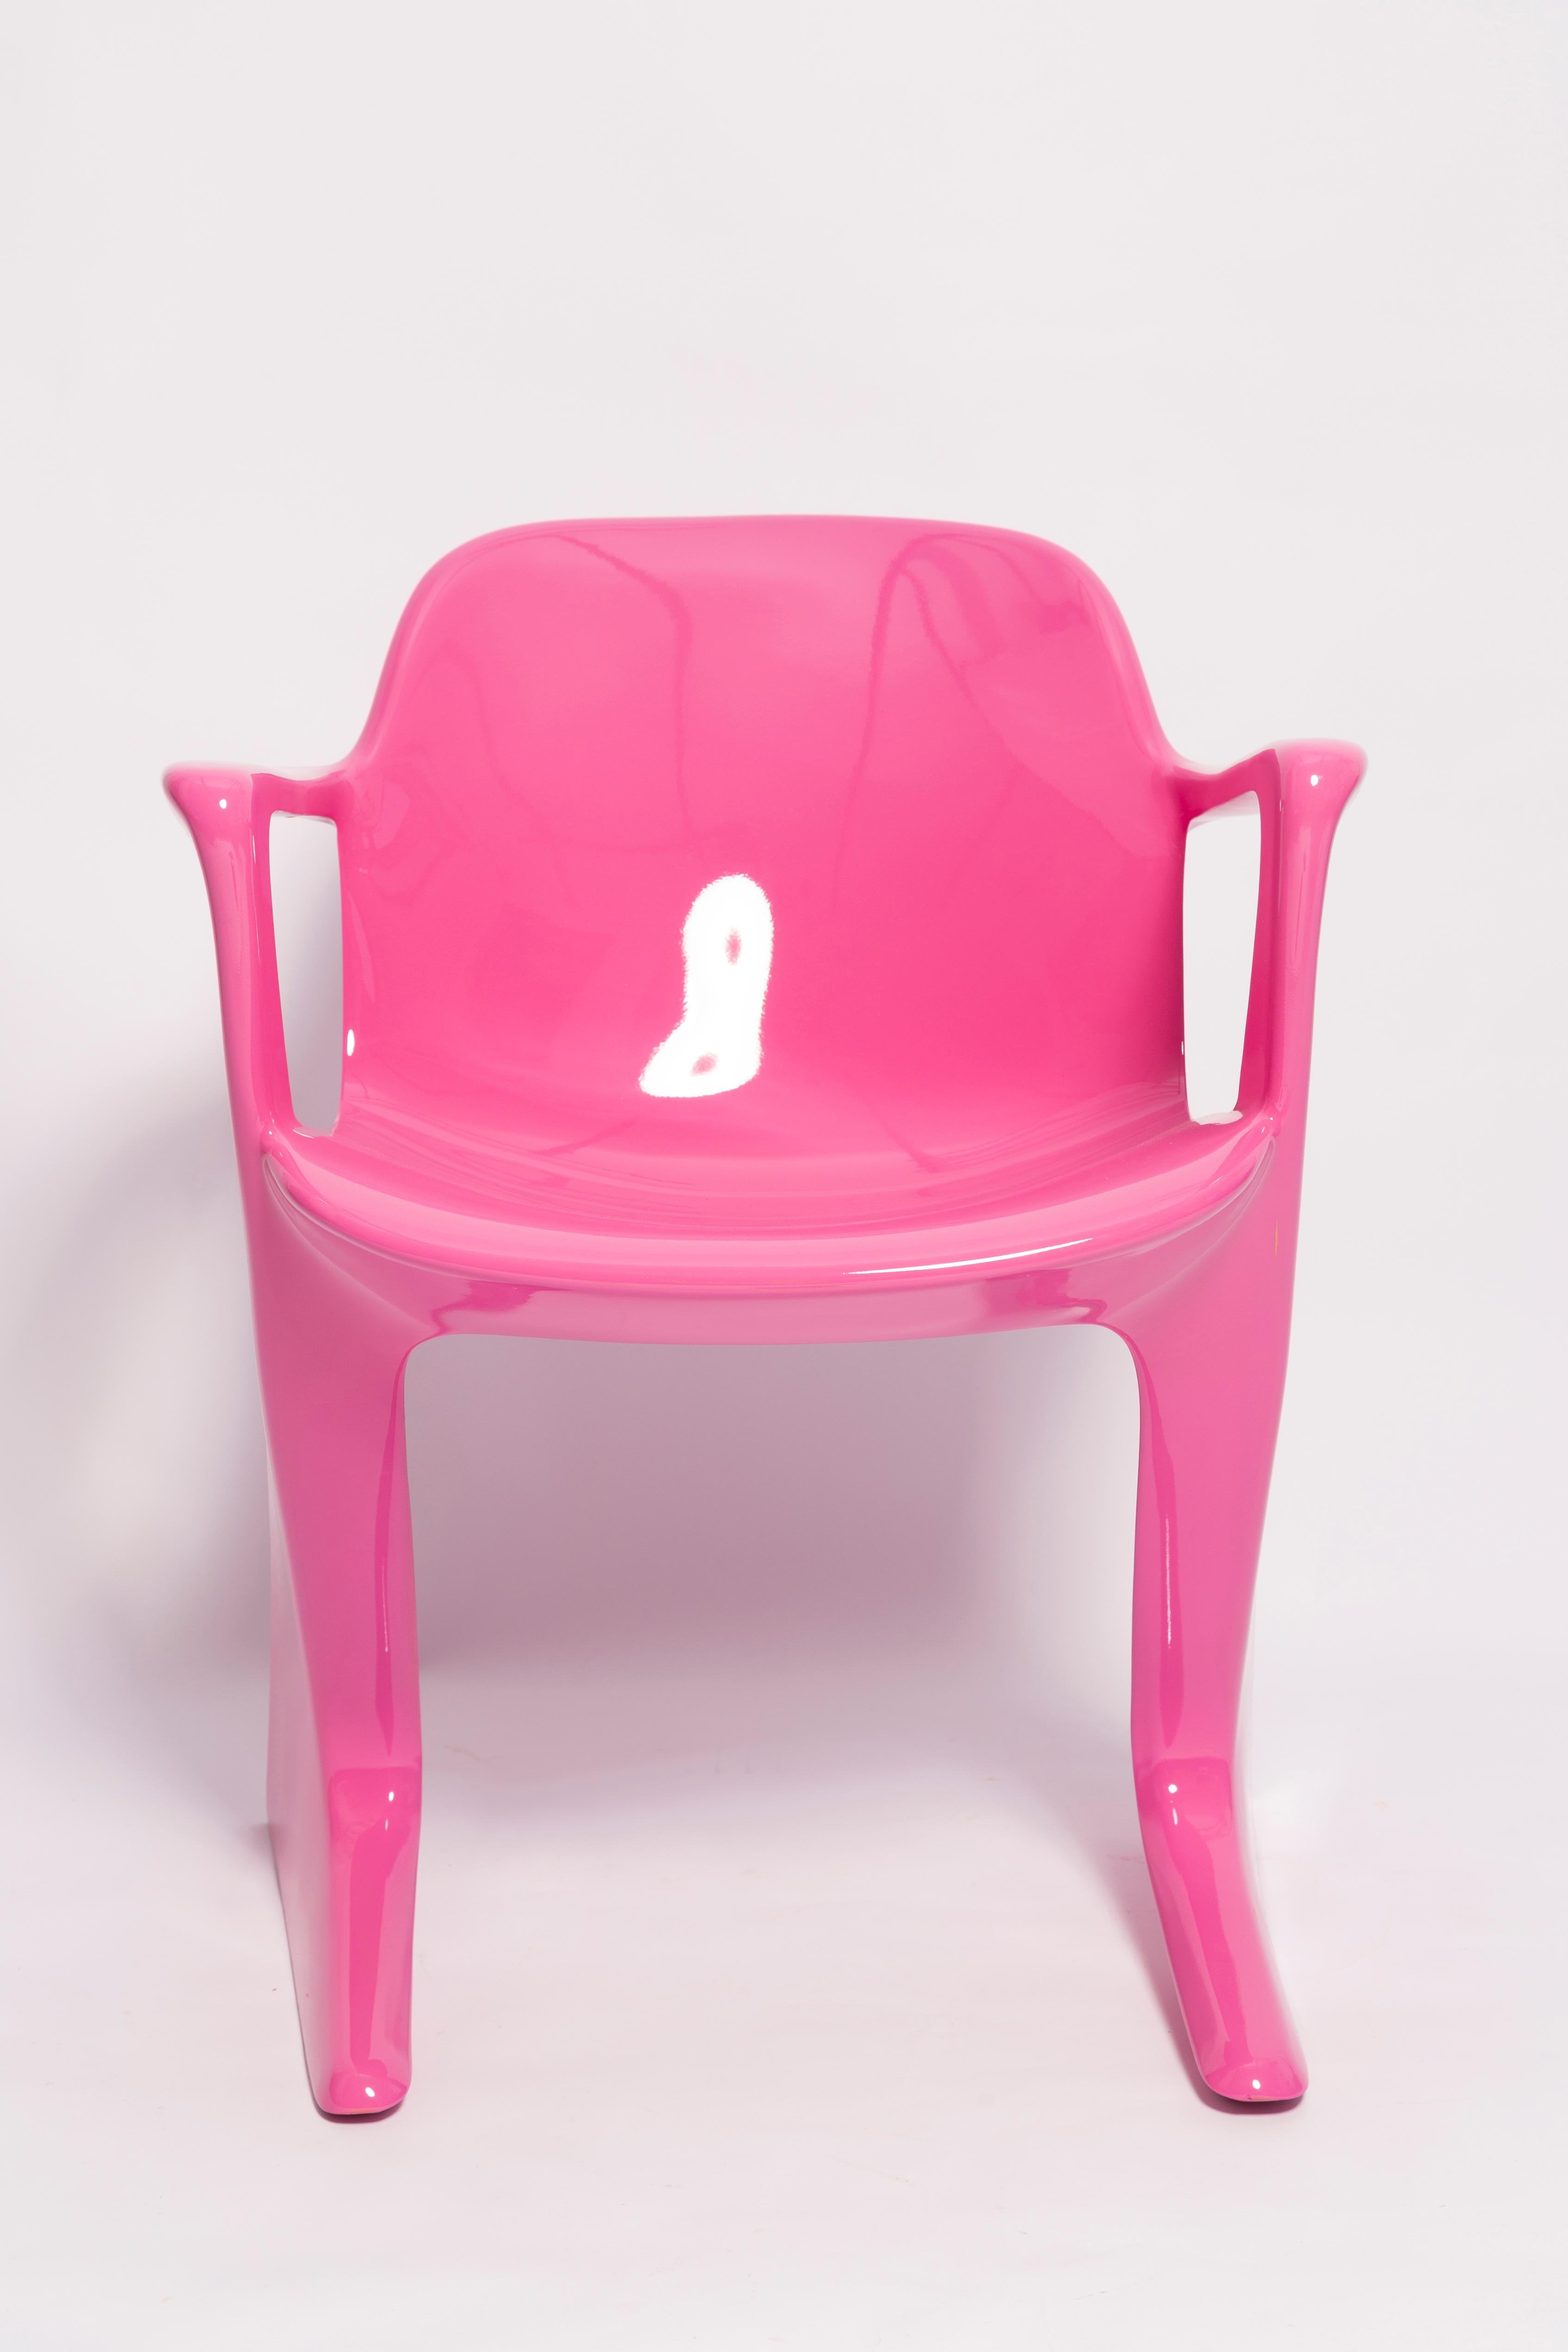 Mid Century Pink Kangaroo Chair Designed by Ernst Moeckl, Germany, 1968 For Sale 2